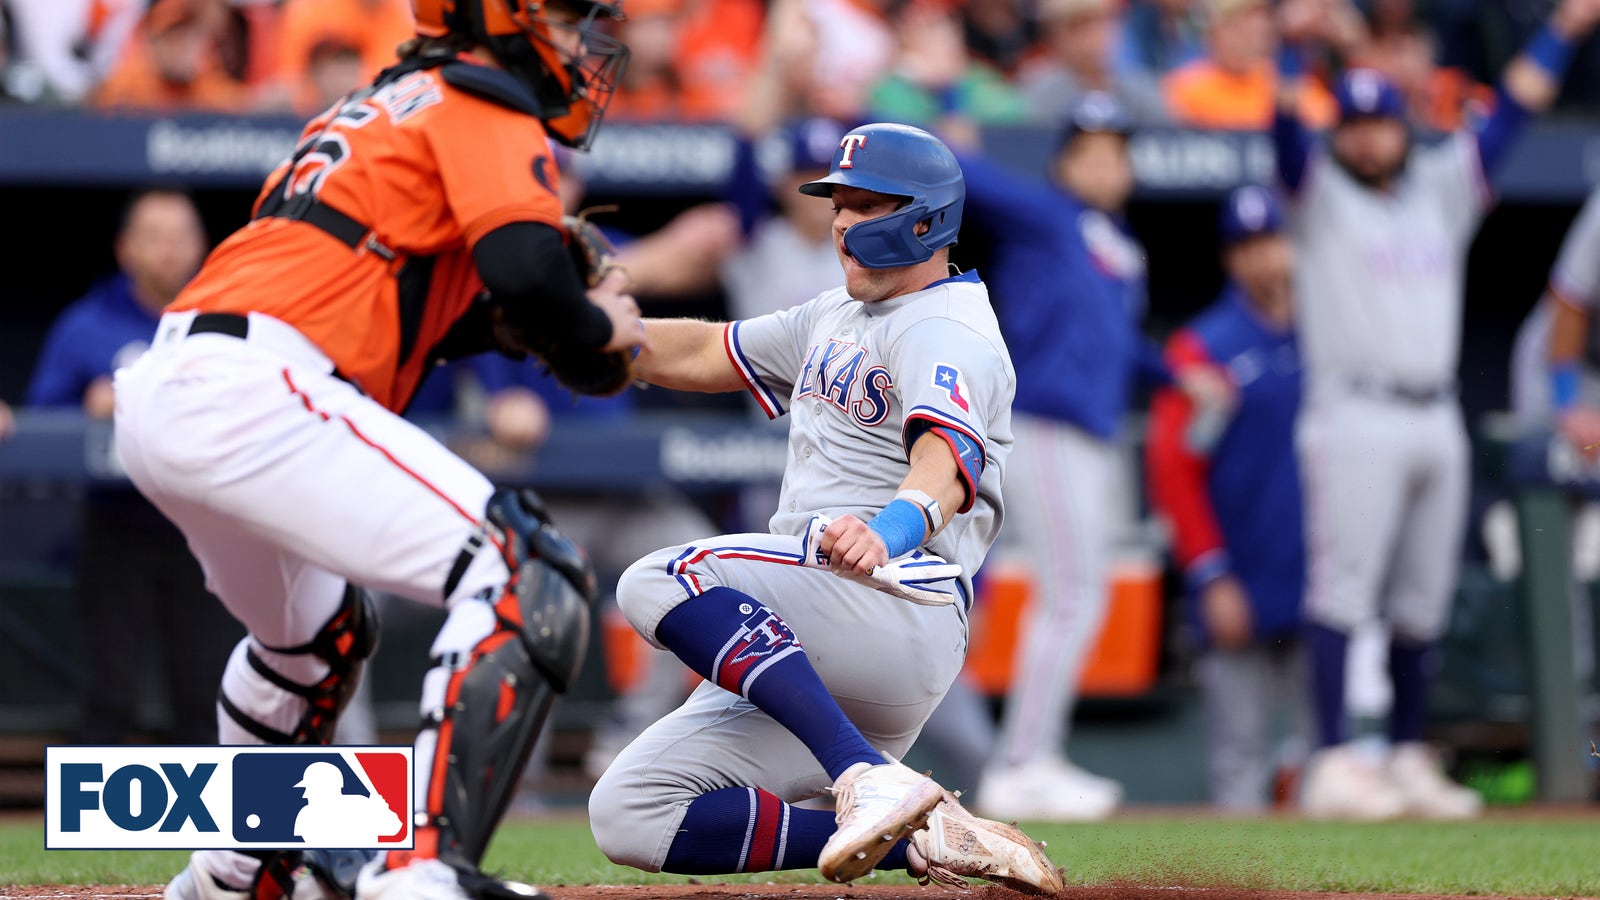 Orioles players perform well in All Star Game despite Bautista slip-up